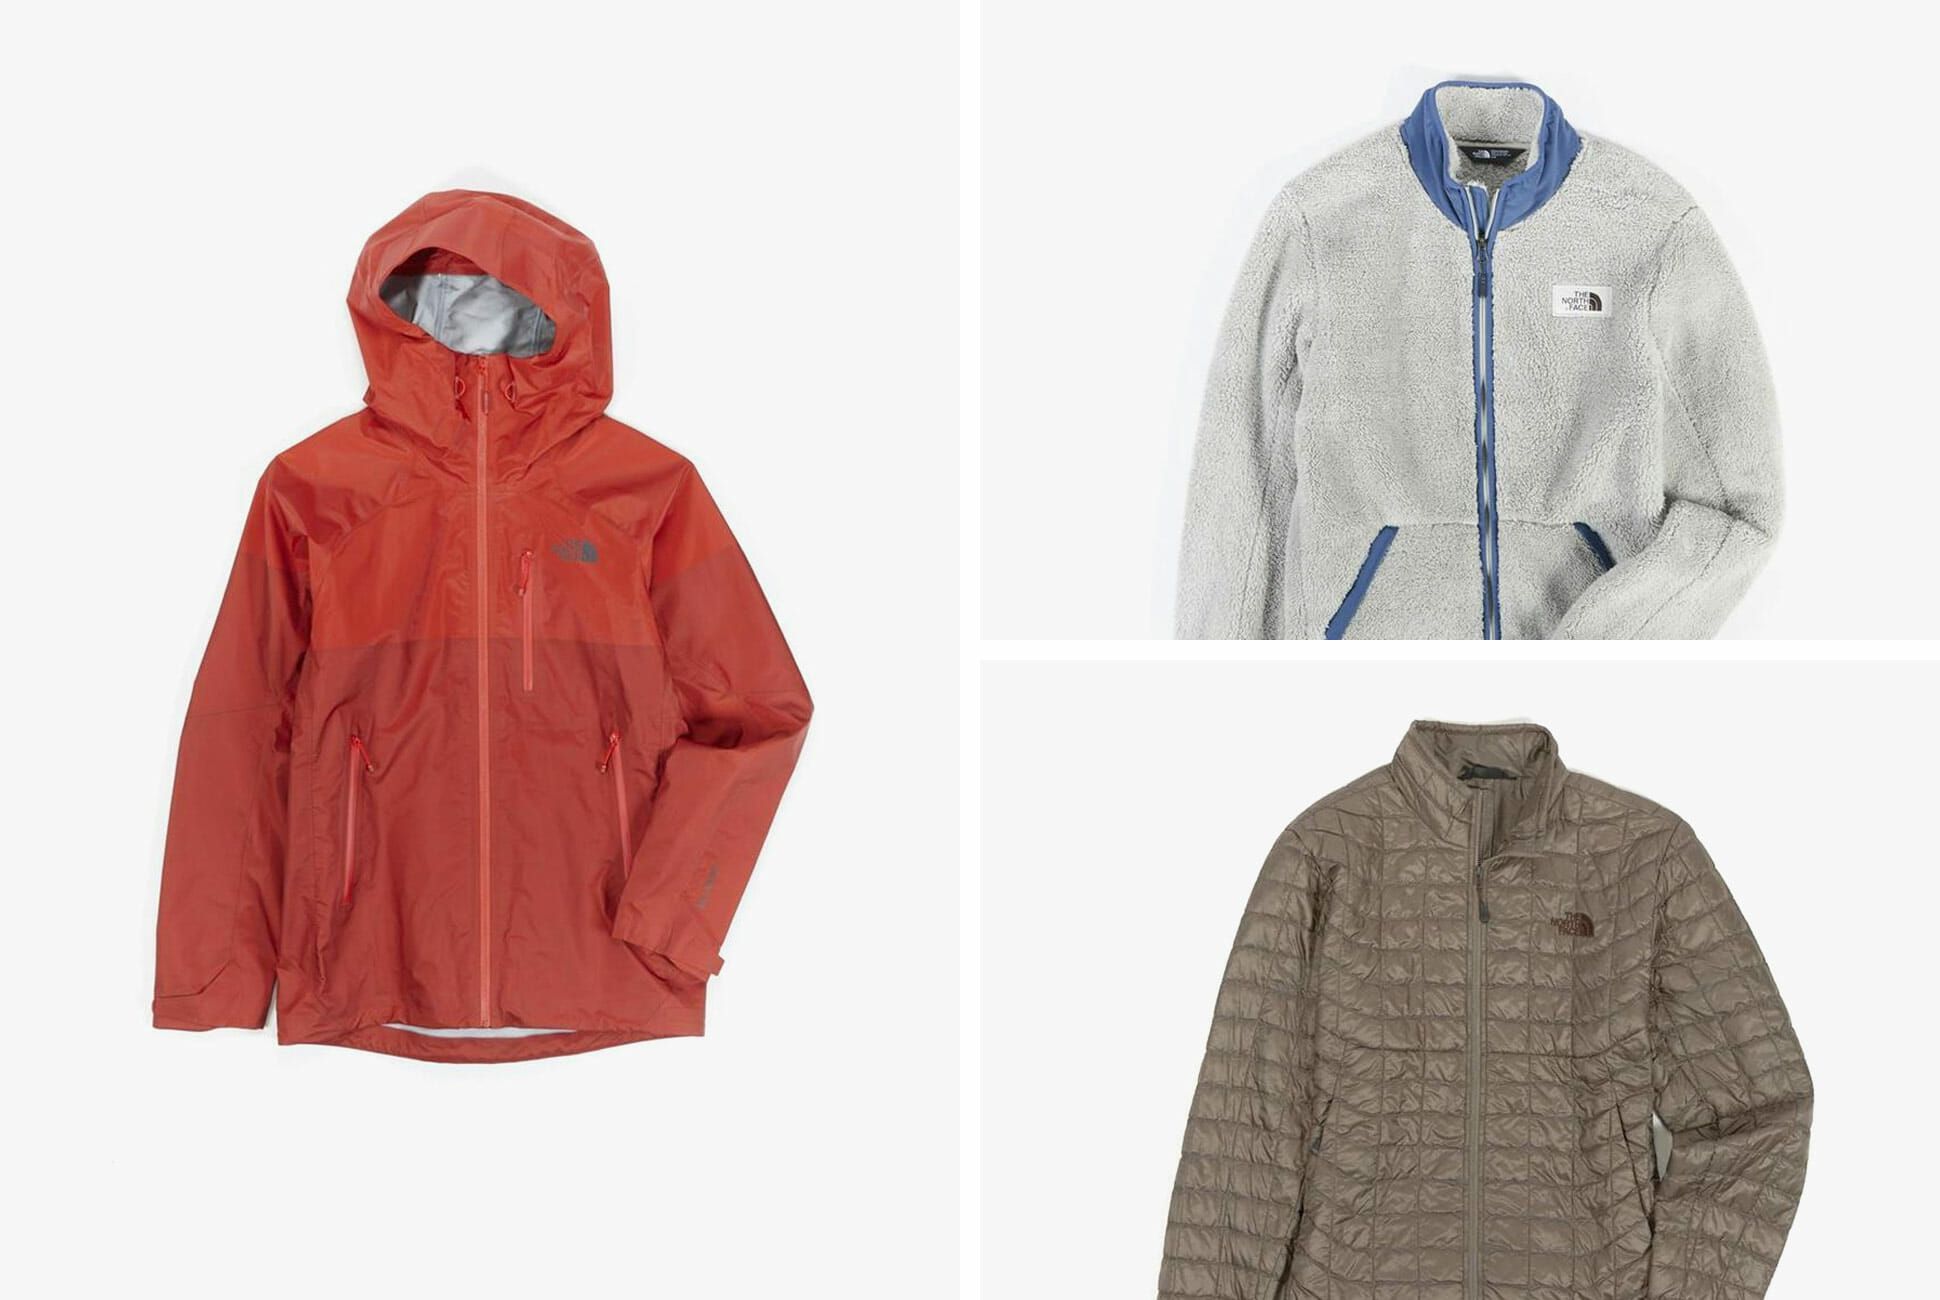 There's a New Way to Get Cheap Gear from The North Face